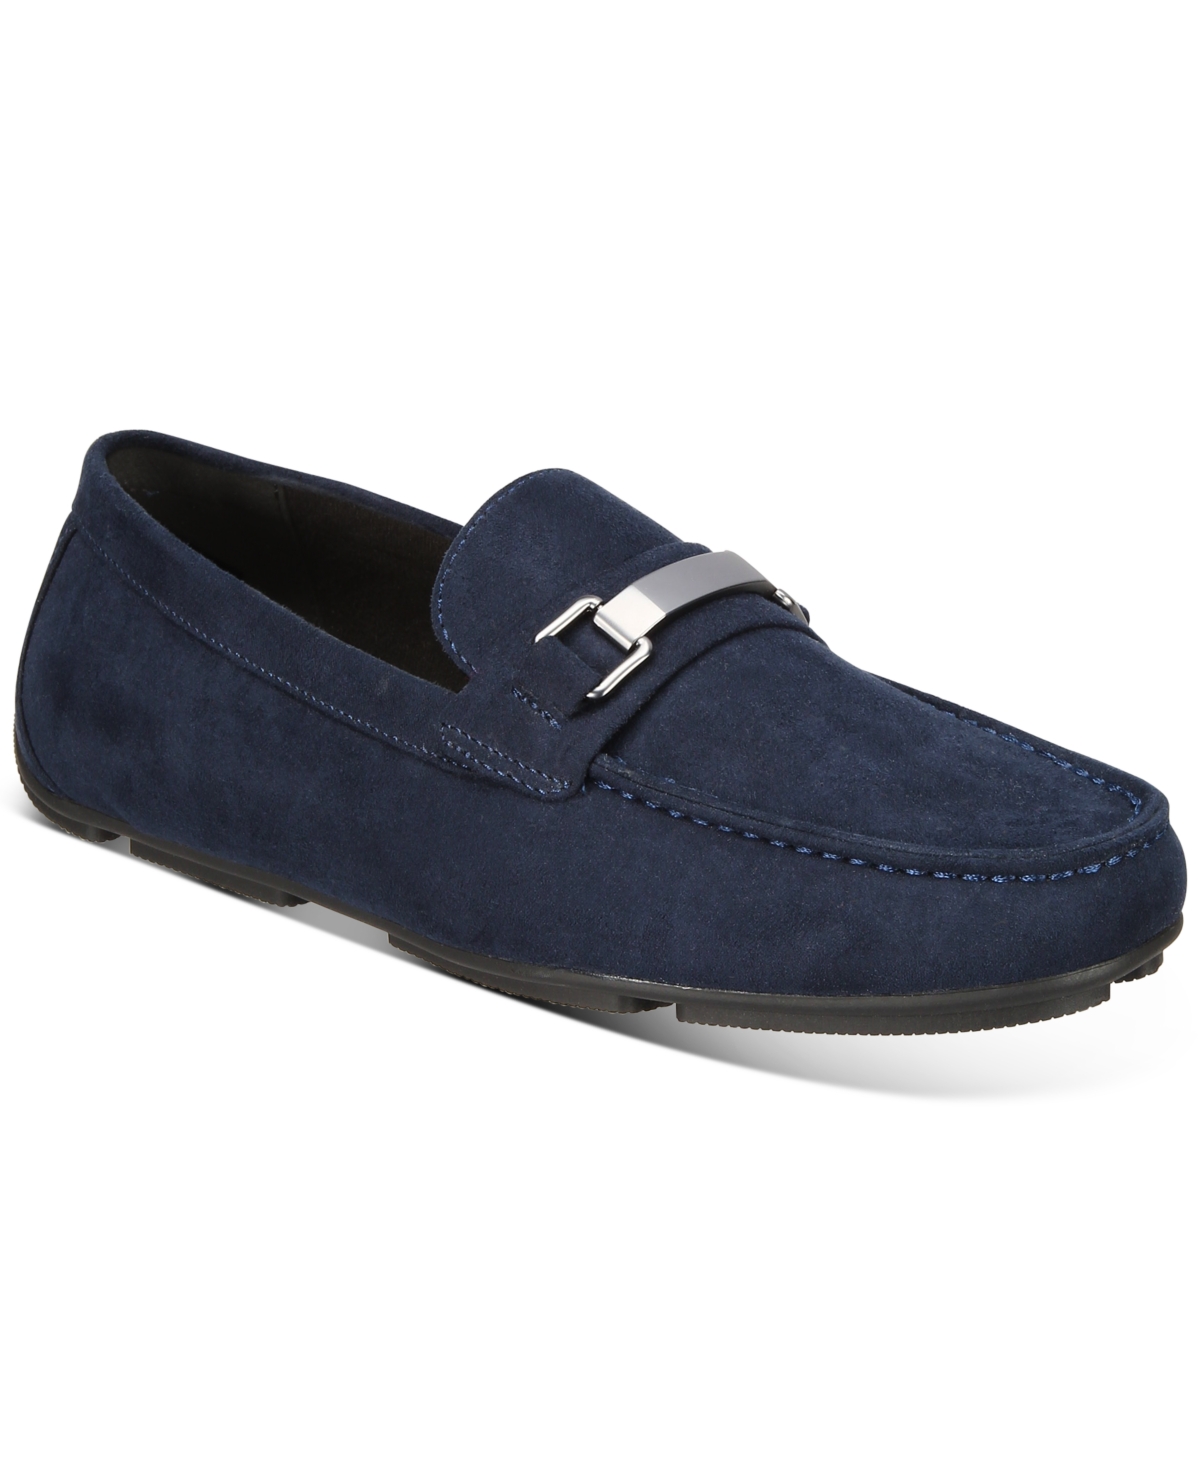 Men's Egan Driving Loafers, Created for Macy's - Chocolate